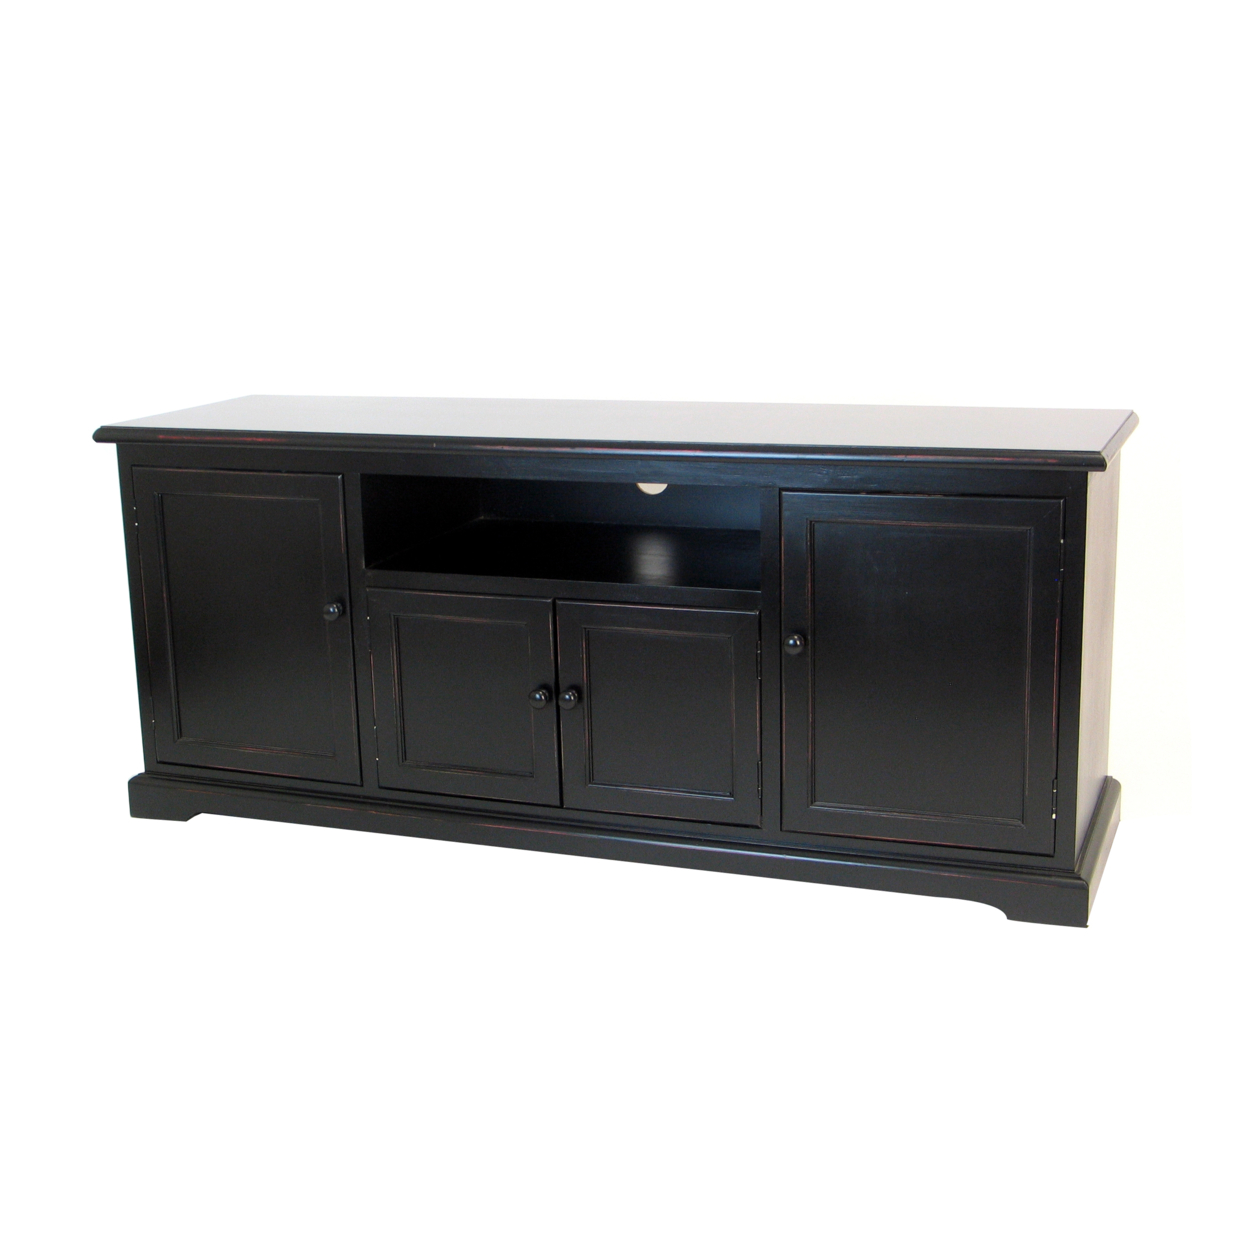 Wooden TV Stand With 1 Shelf And 3 Cabinets, Black- Saltoro Sherpi